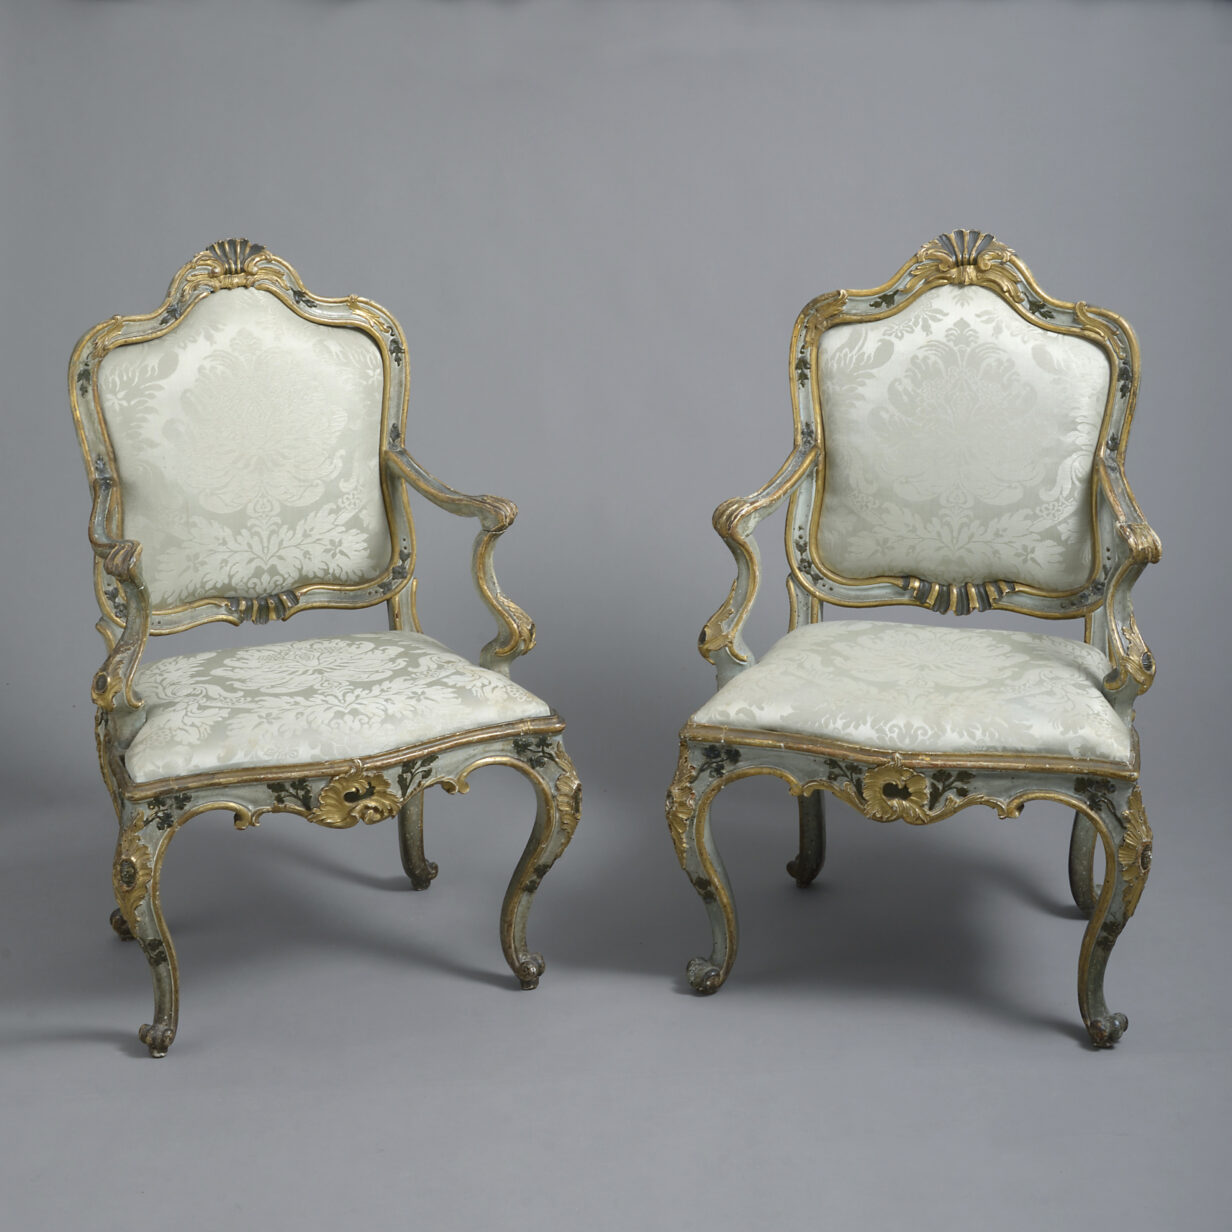 Mid-18th century rococo canapé and open armchairs